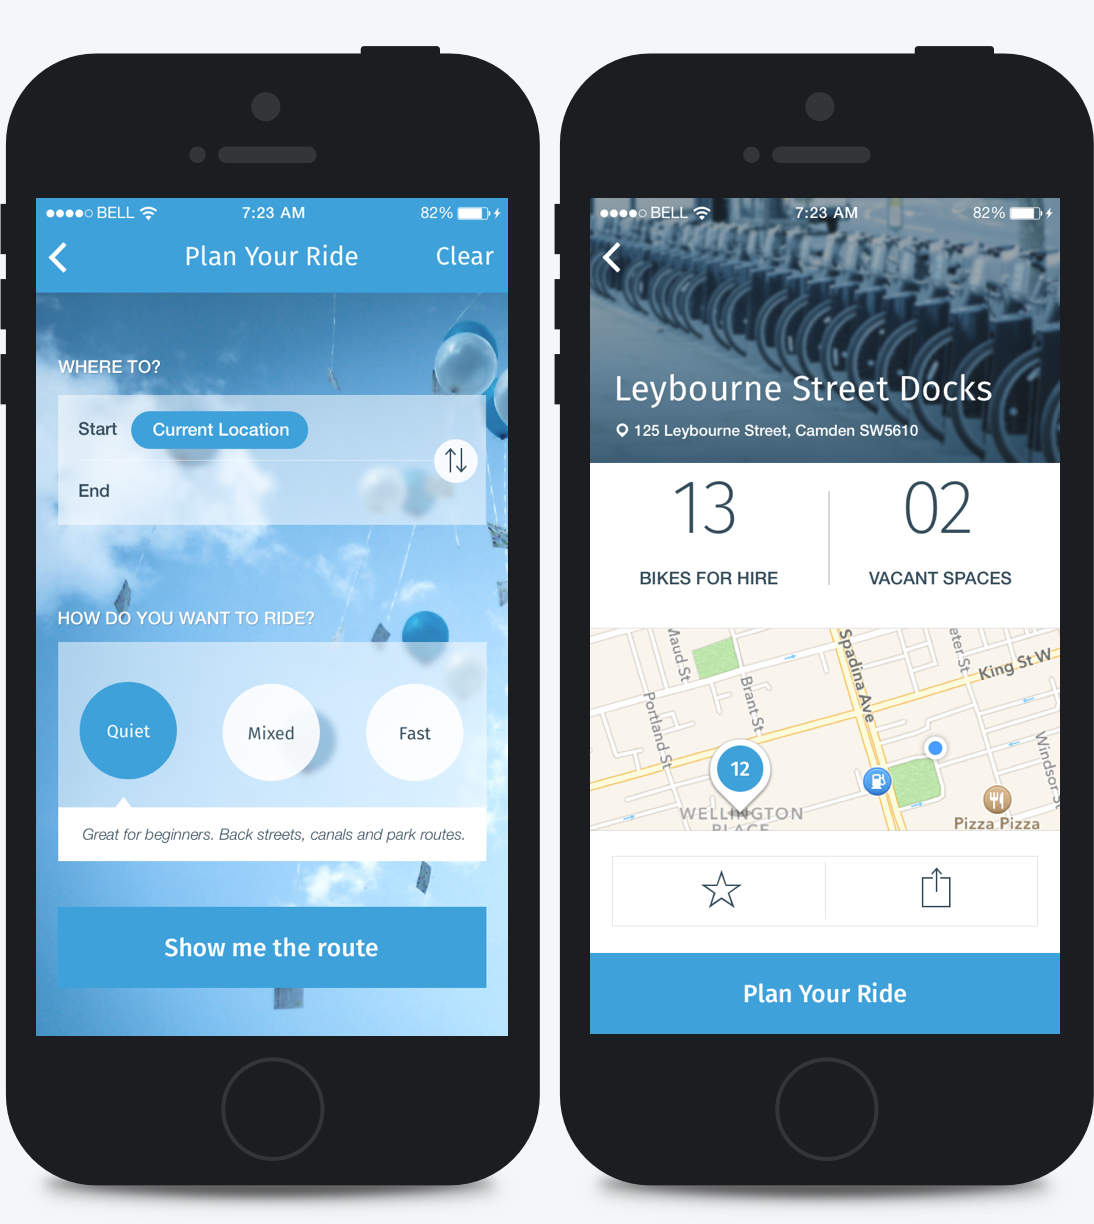 The Barclays Bikes Application 'Plan a Ride' and 'Docking station info' screens.